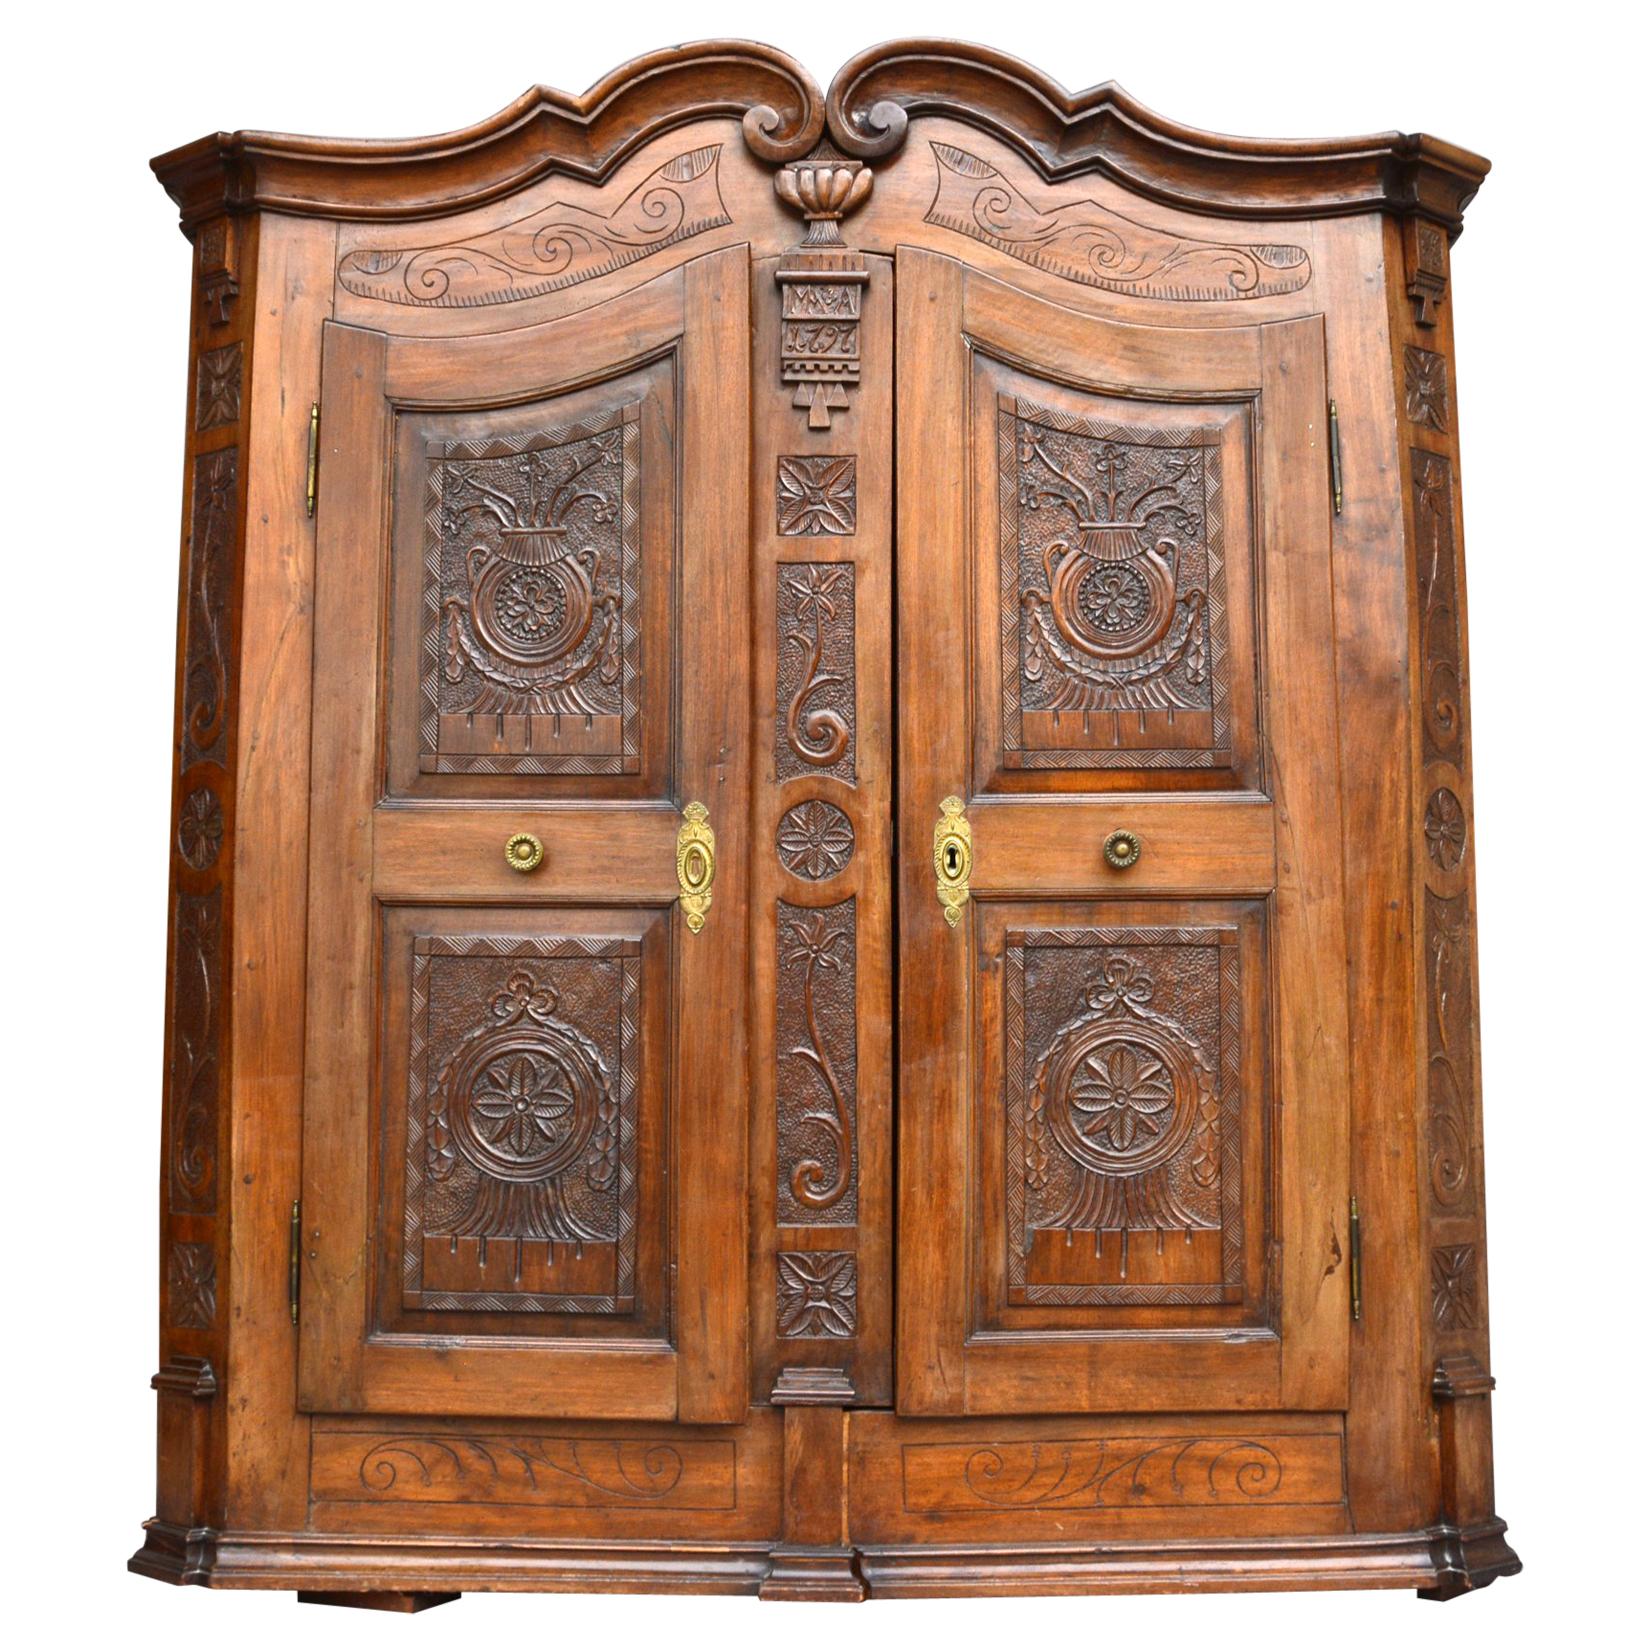 Cabinet from Salem, Lake Constance Area, Germany "Bodenseeschrank", Dated 1791